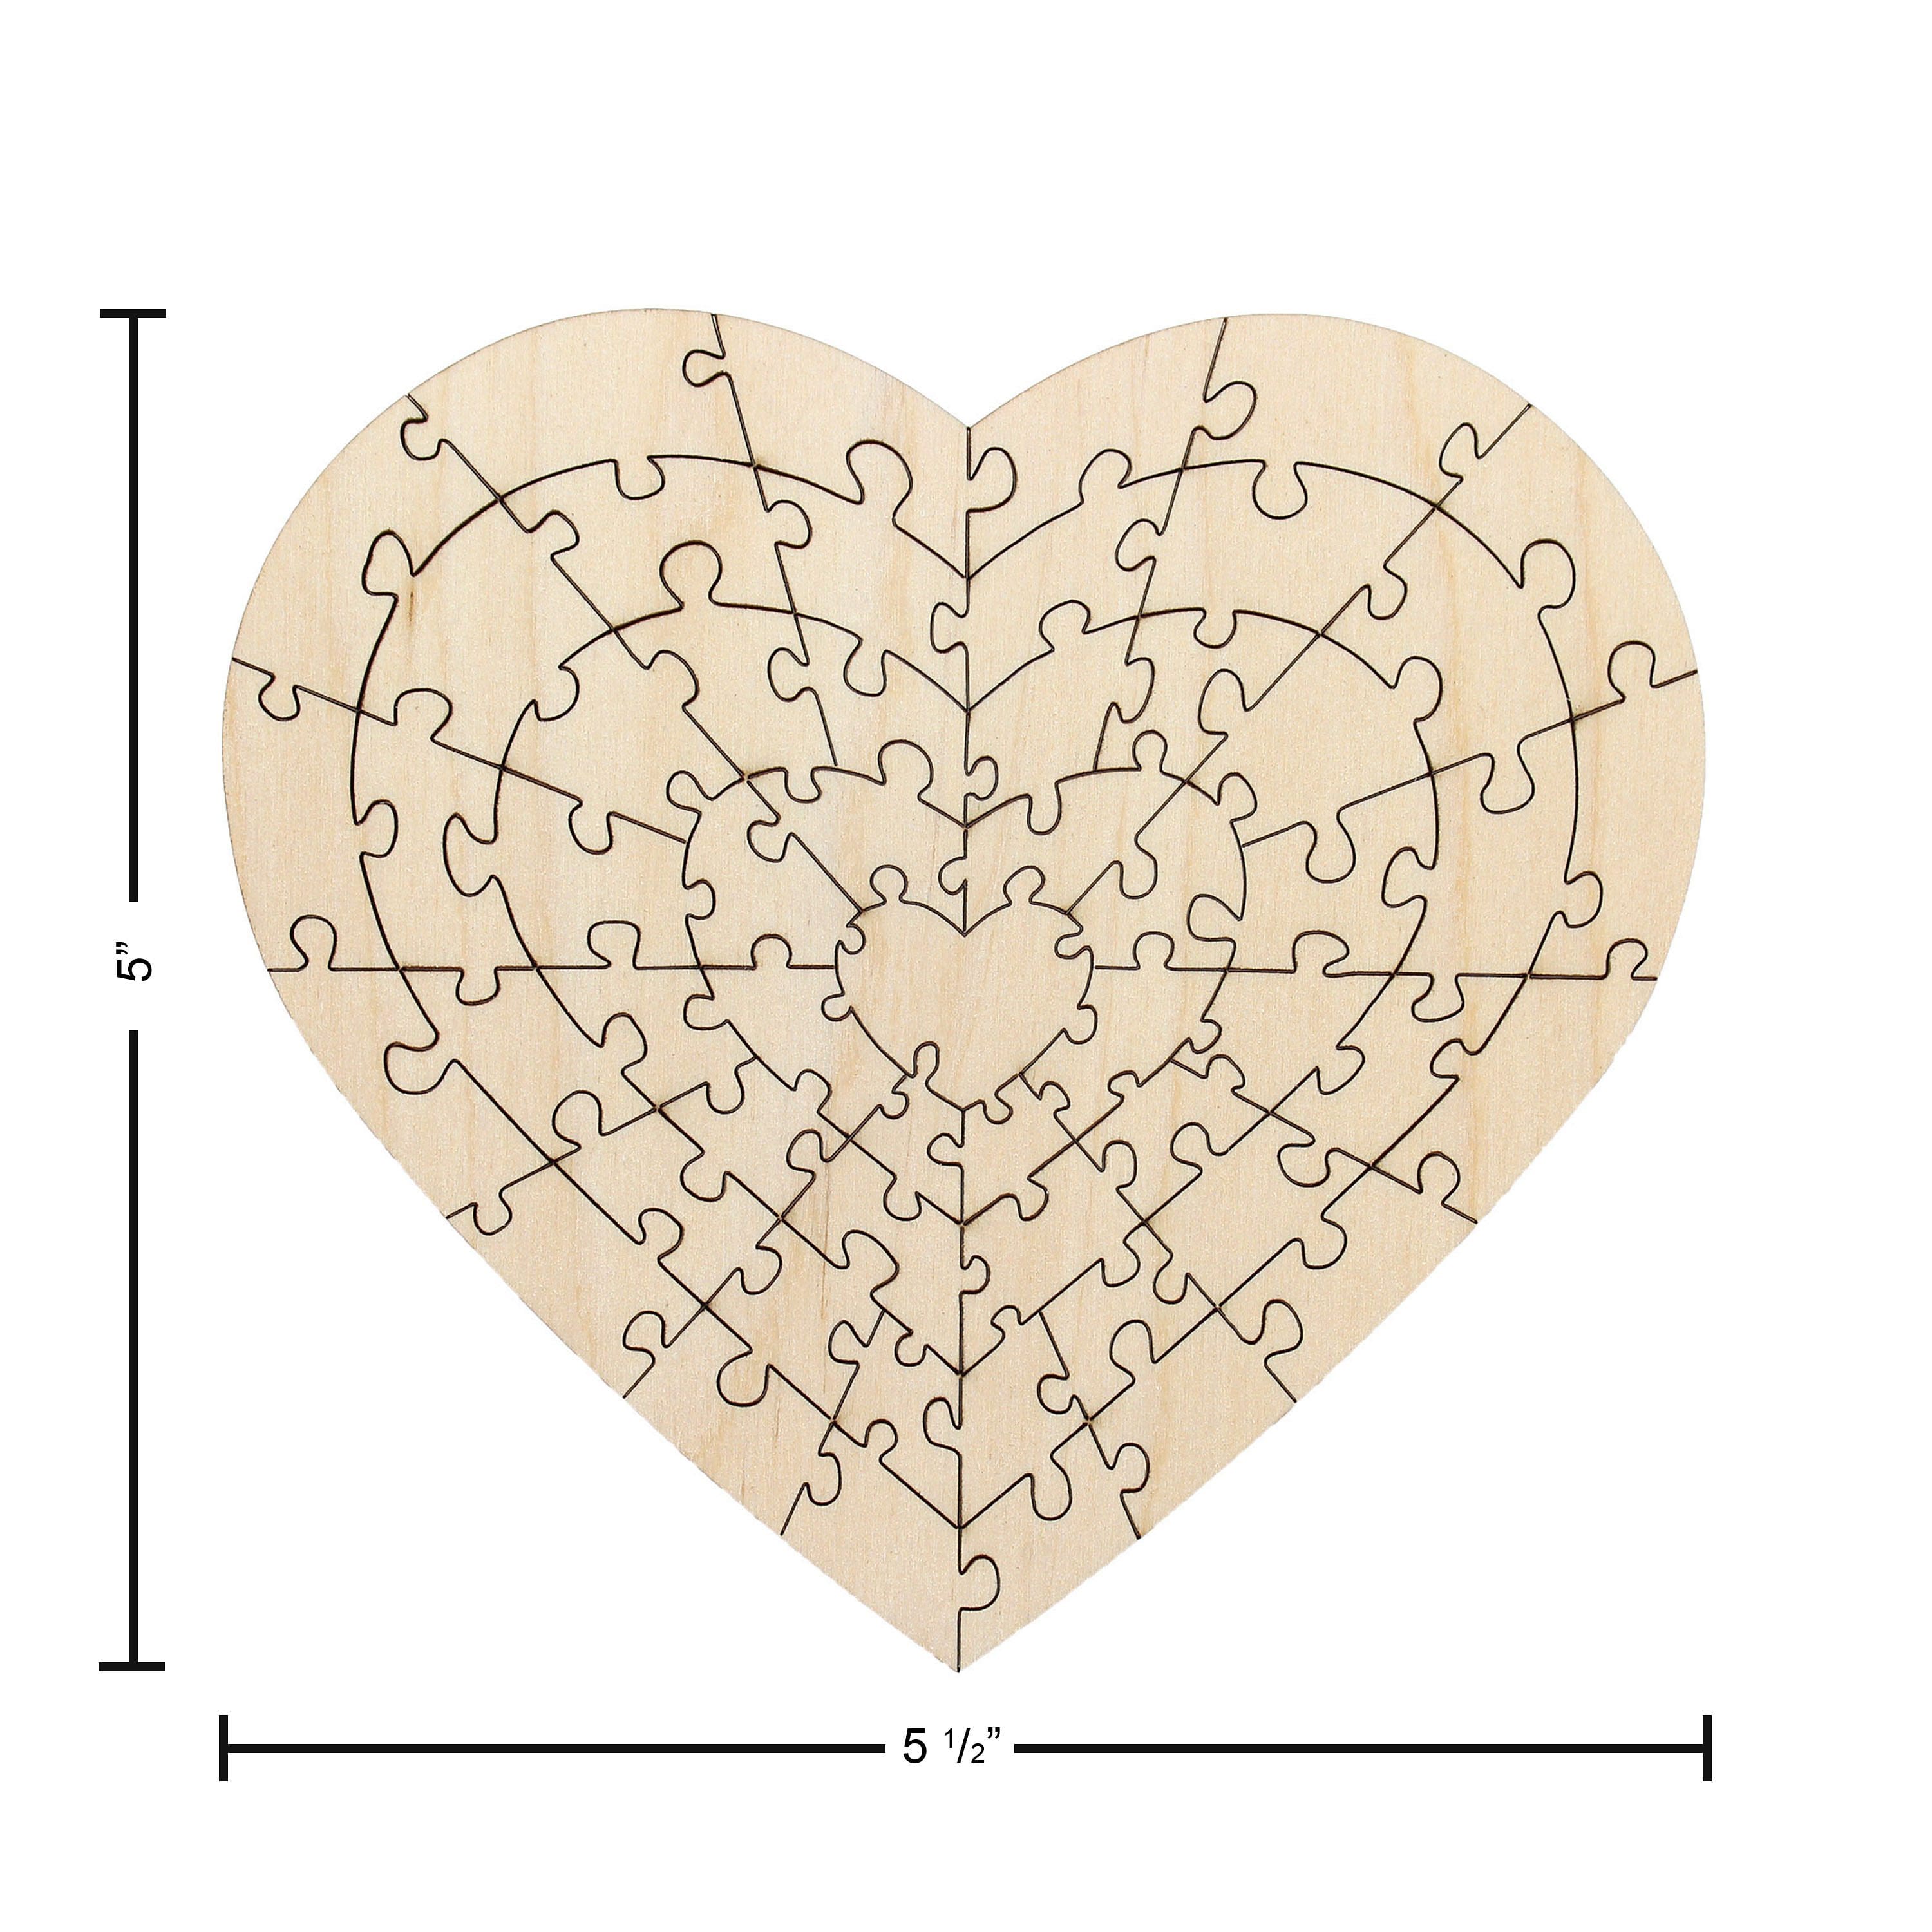 Leisure Arts&#xAE; Small Heart D.I.Y. Wood Puzzle